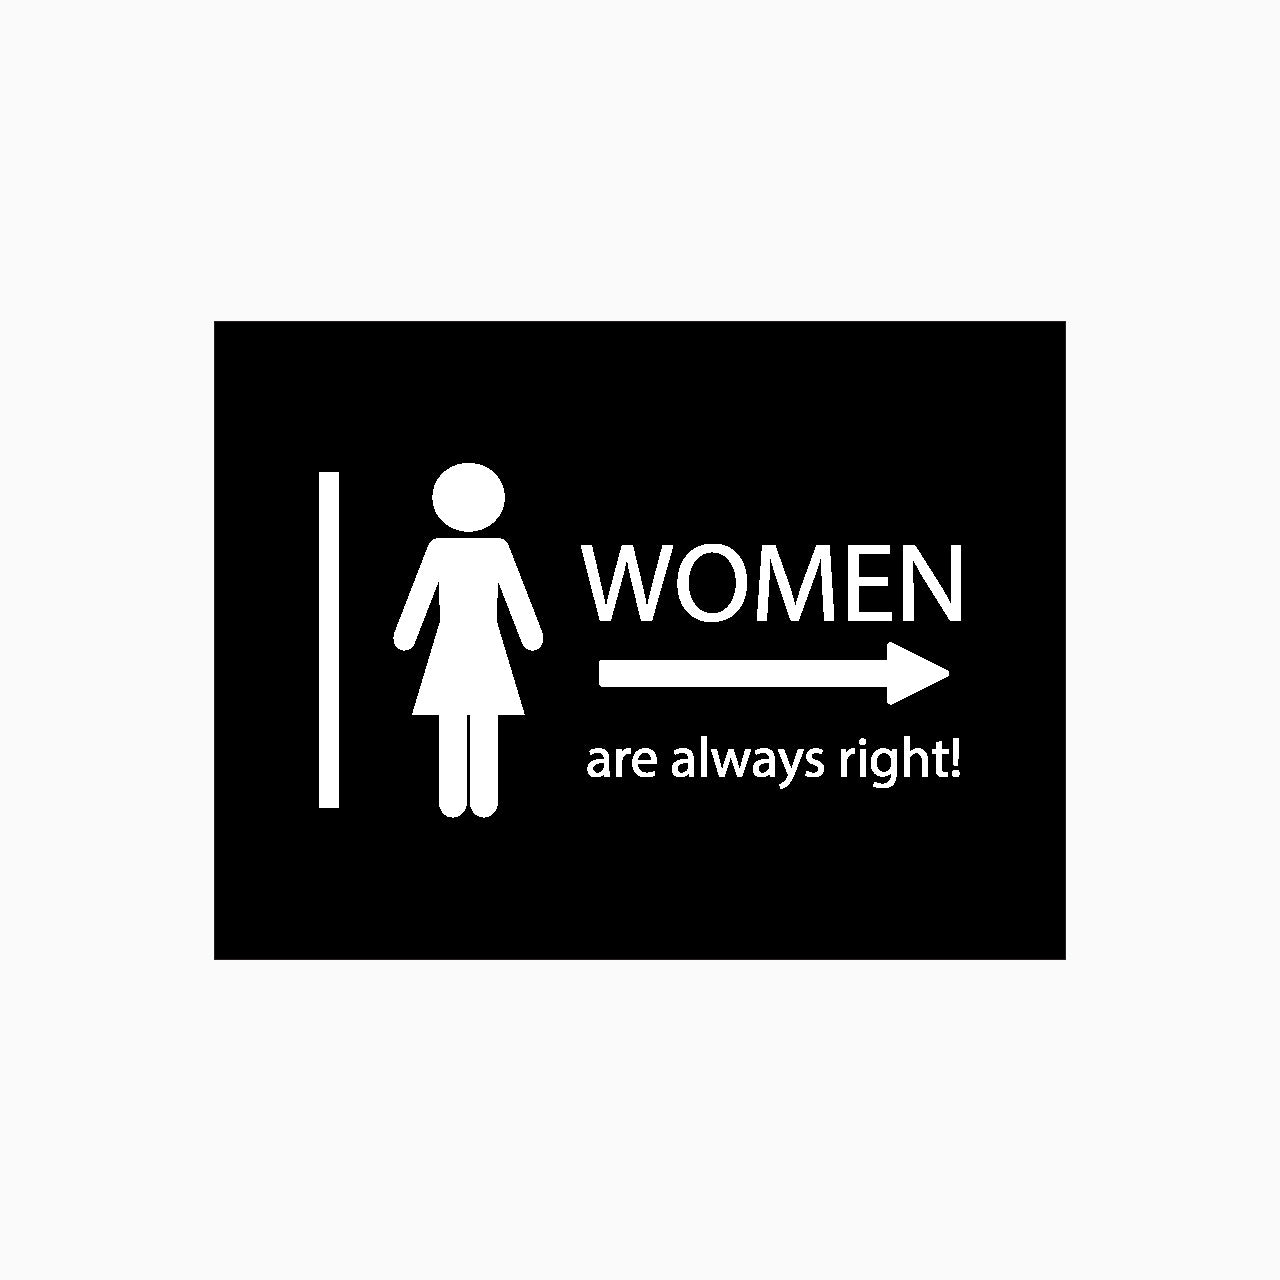 WOMEN are always right - Toilet sign (right arrow)